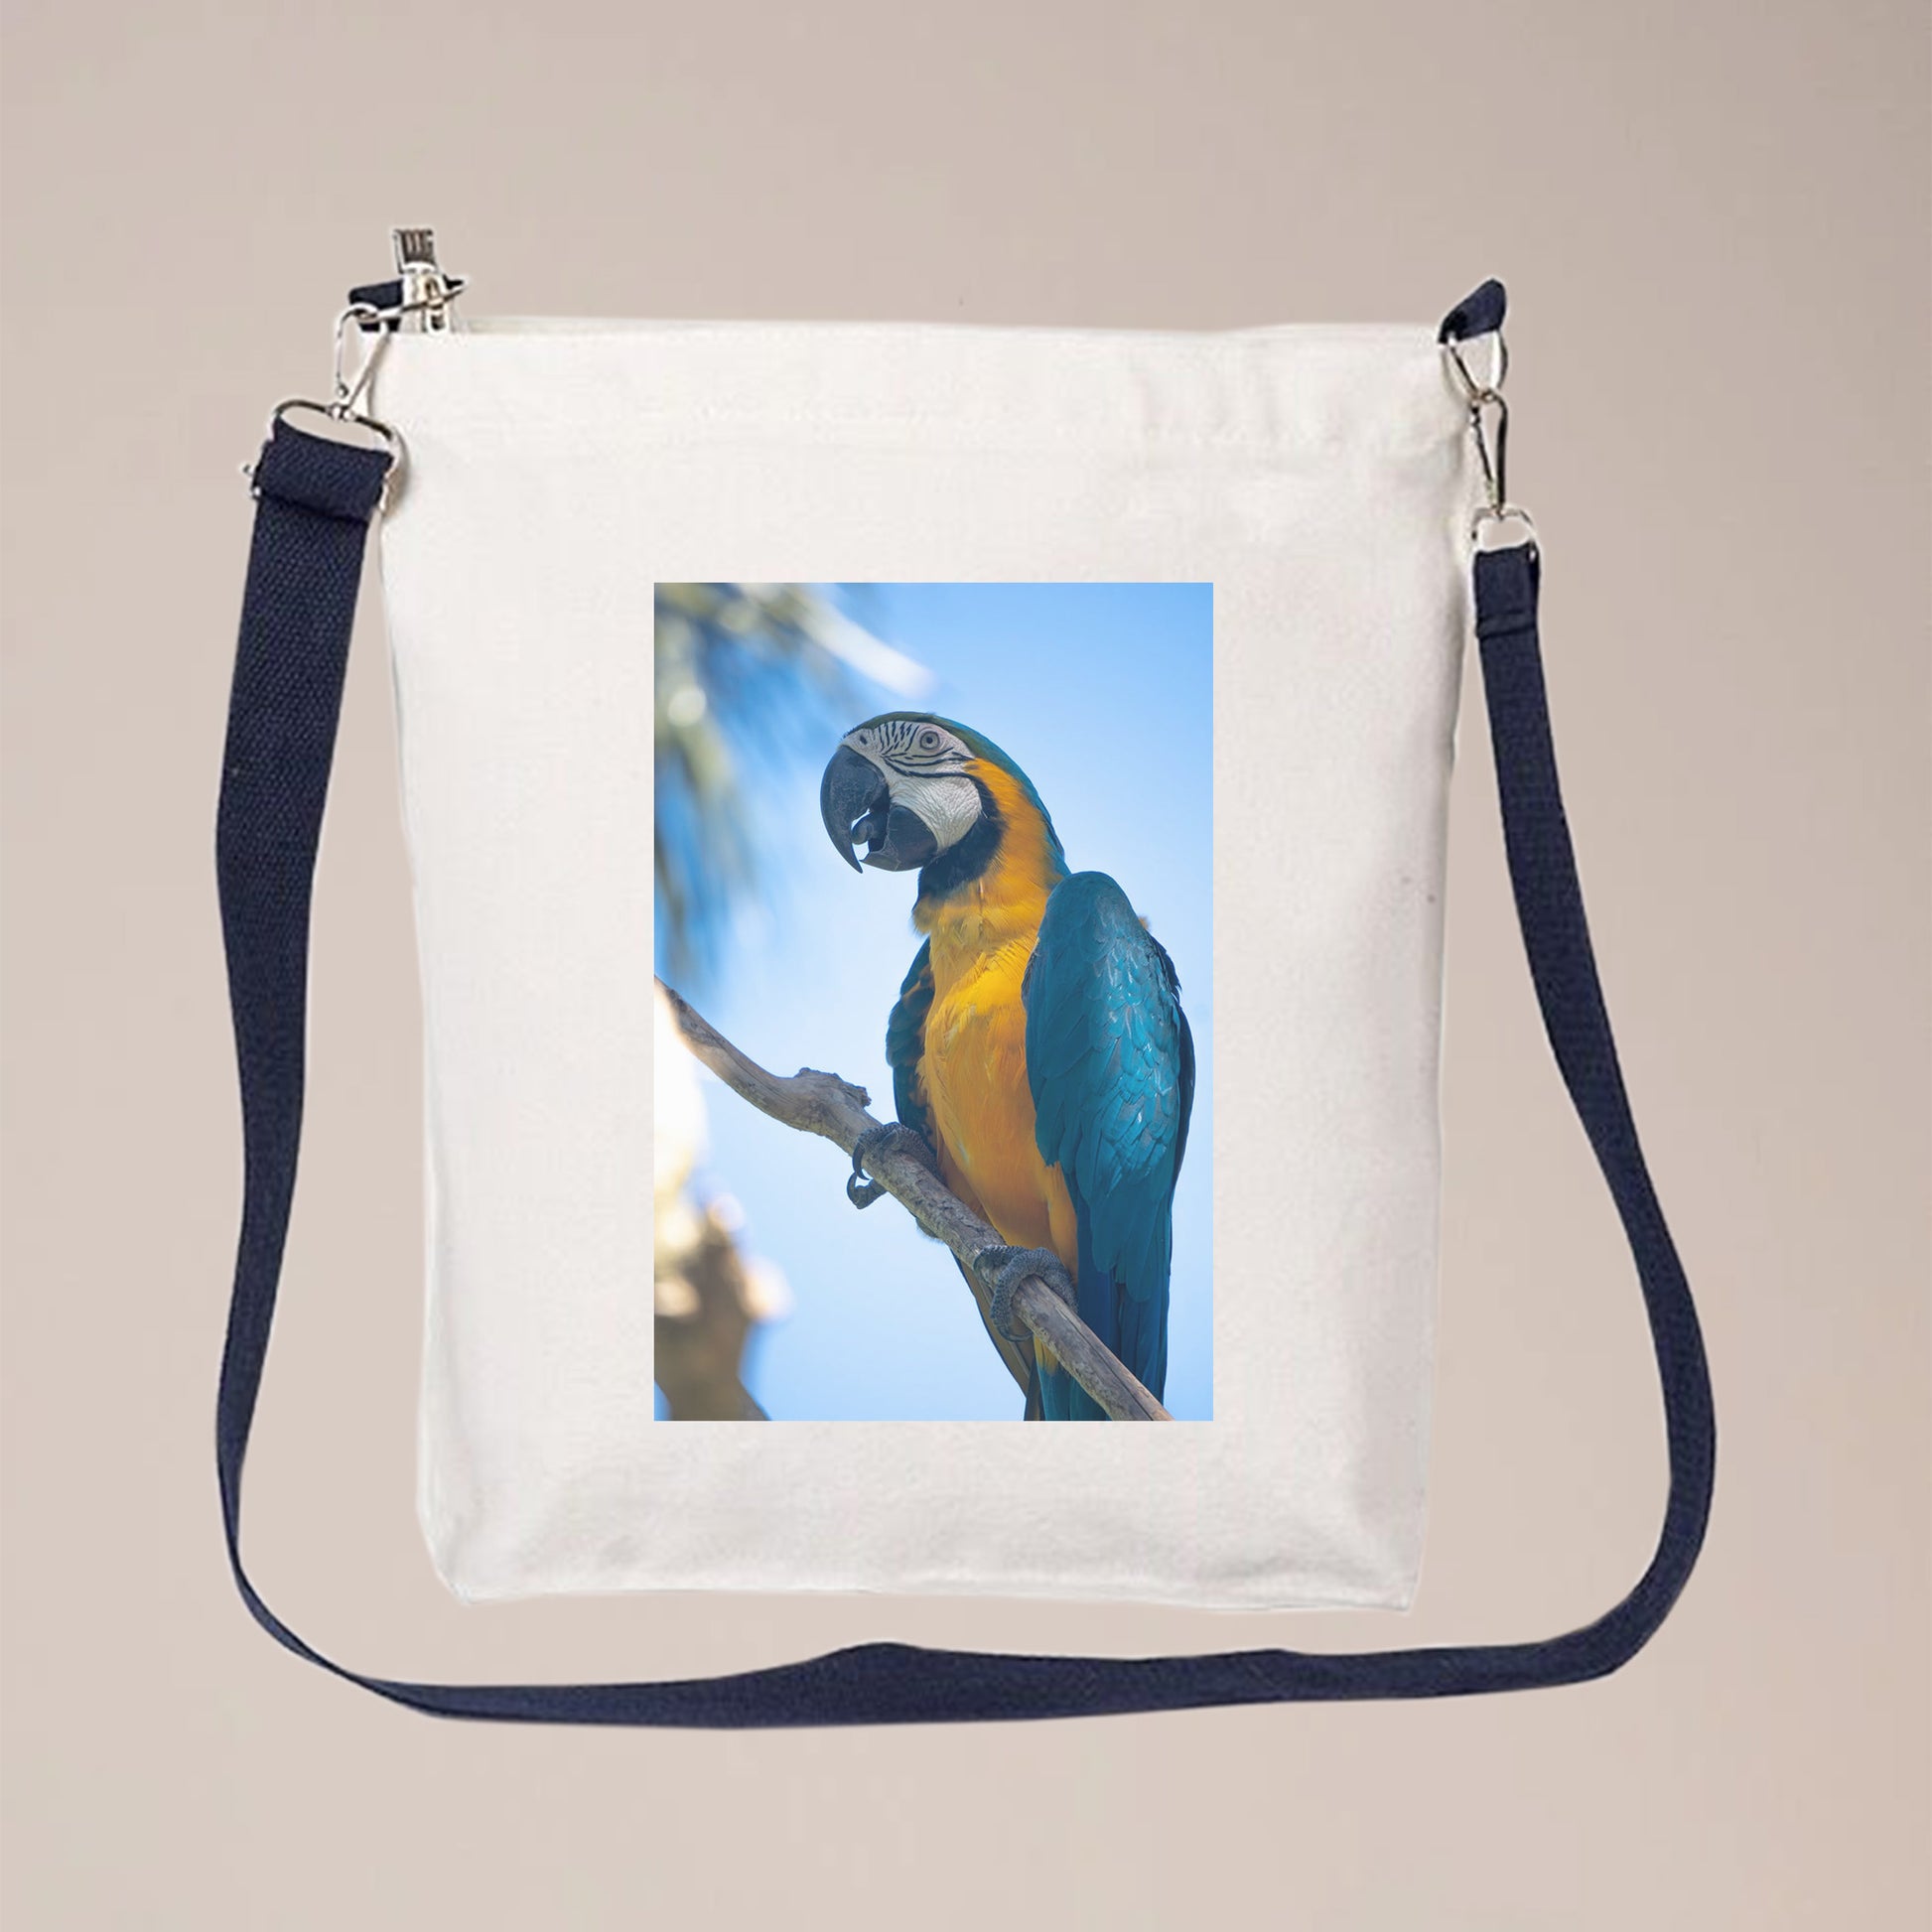 A photo of a bird is printed on a white canvas bag with a blue strap. The bag can be used as the crossbody bag because it has a long strap which is adjustable. People can personalize this crossbody bag with pet photos, initials, logos, text, etc.